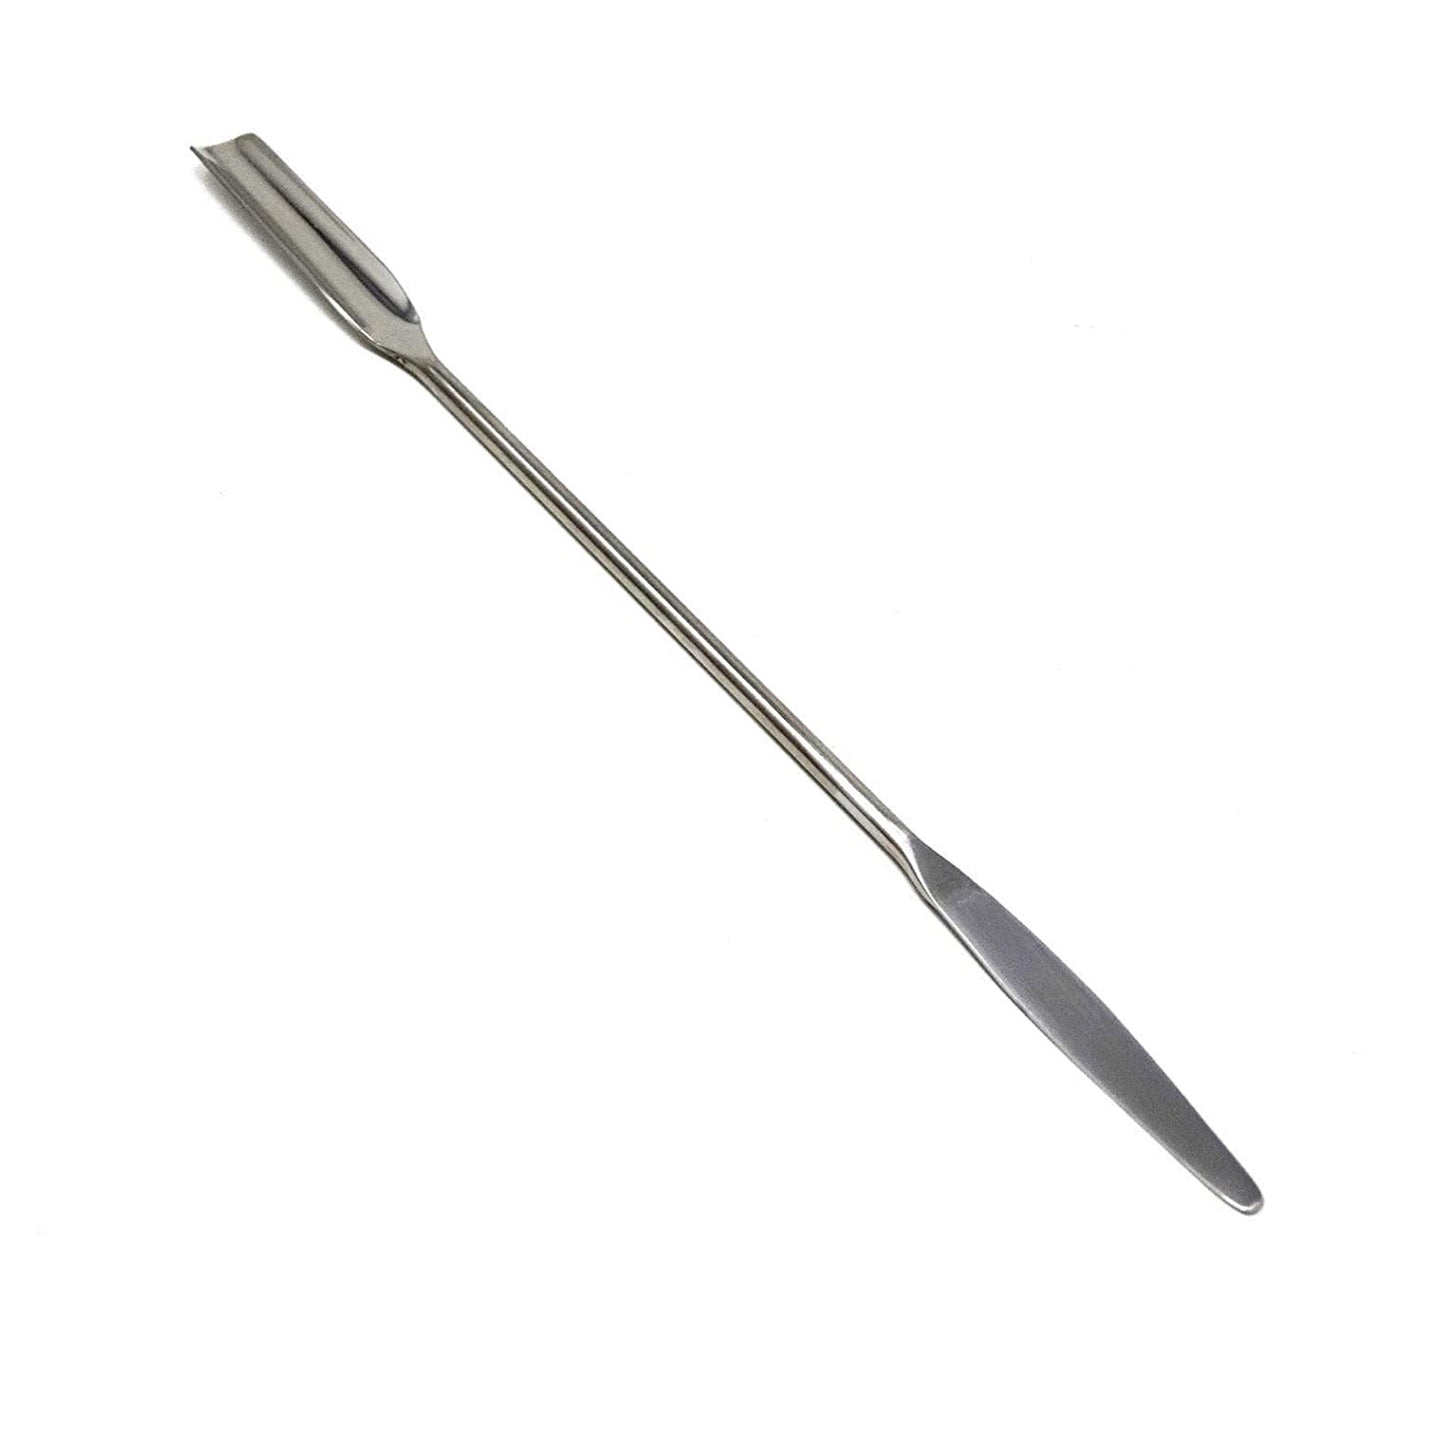 IMS-DE009 Stainless Steel Double Ended Micro Lab Spatula, Semi Circle Scoop Spoon & Tapered Arrow End, 9" Length